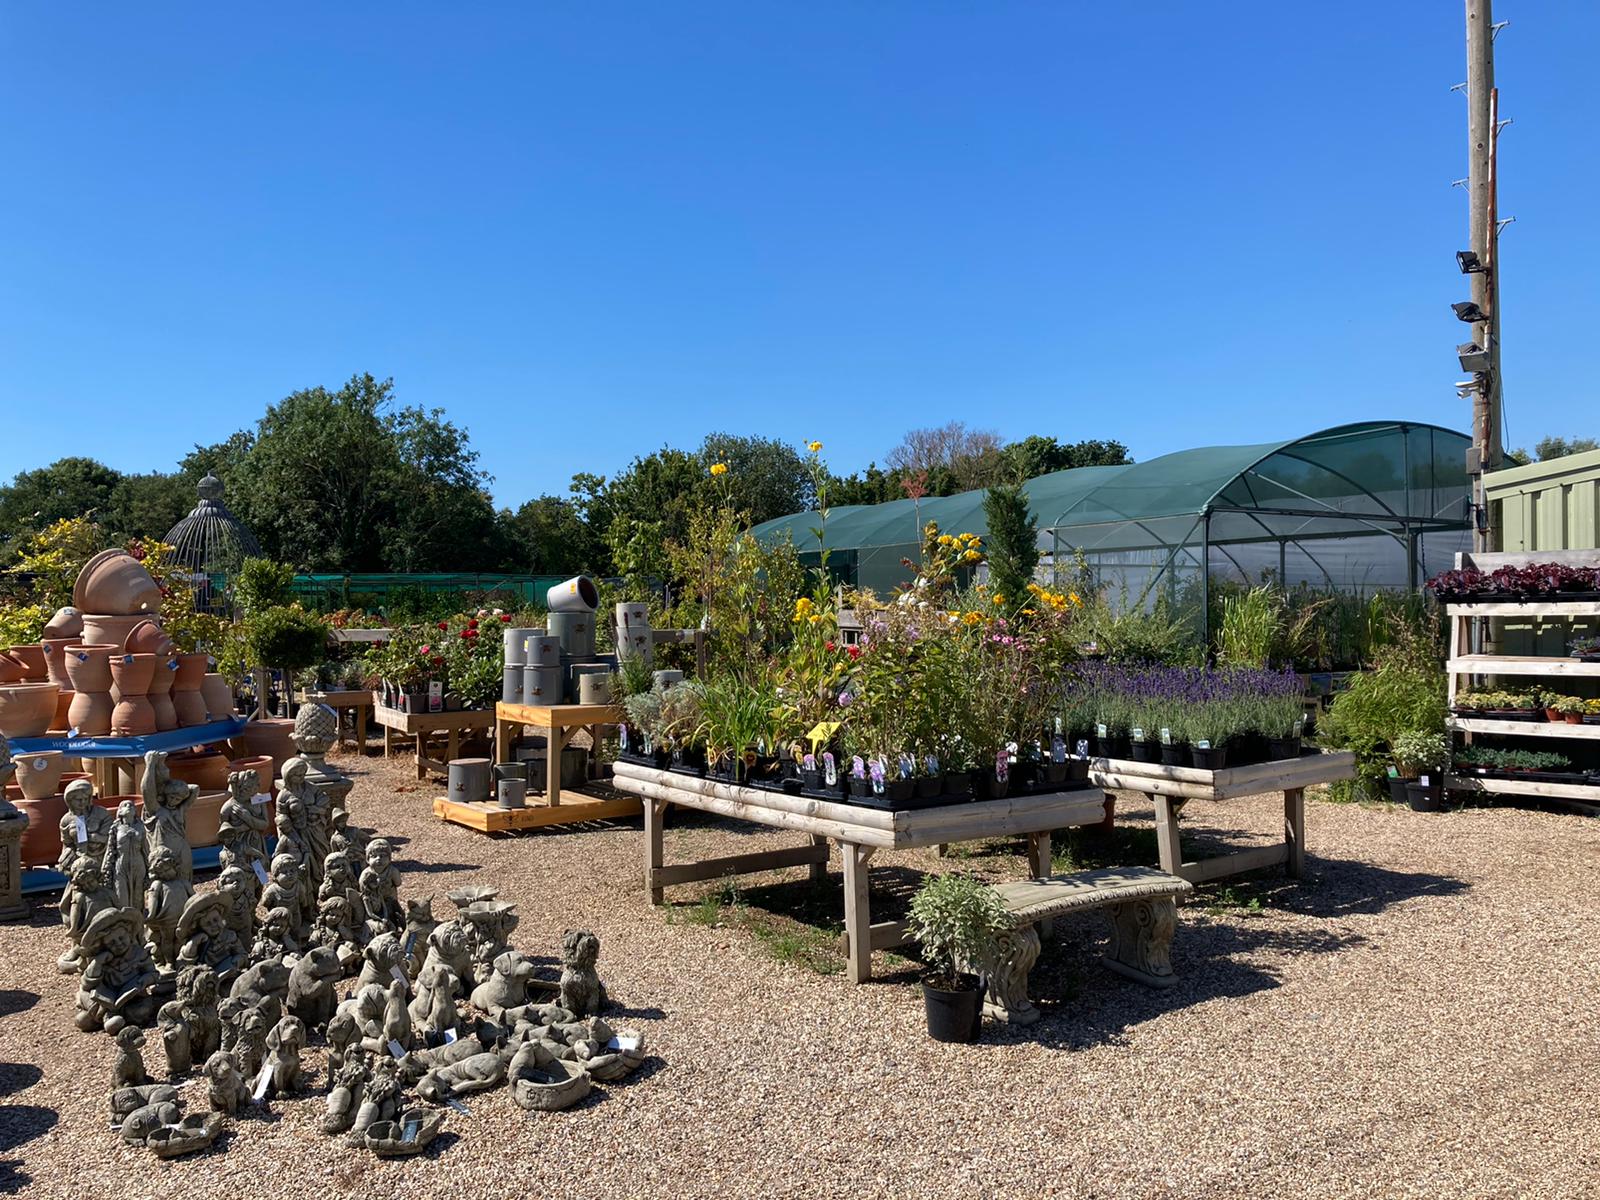 Pete Cook, manager of Chalcroft Nurseries near Bognor Regis is not surprised the town is one of the driest in England